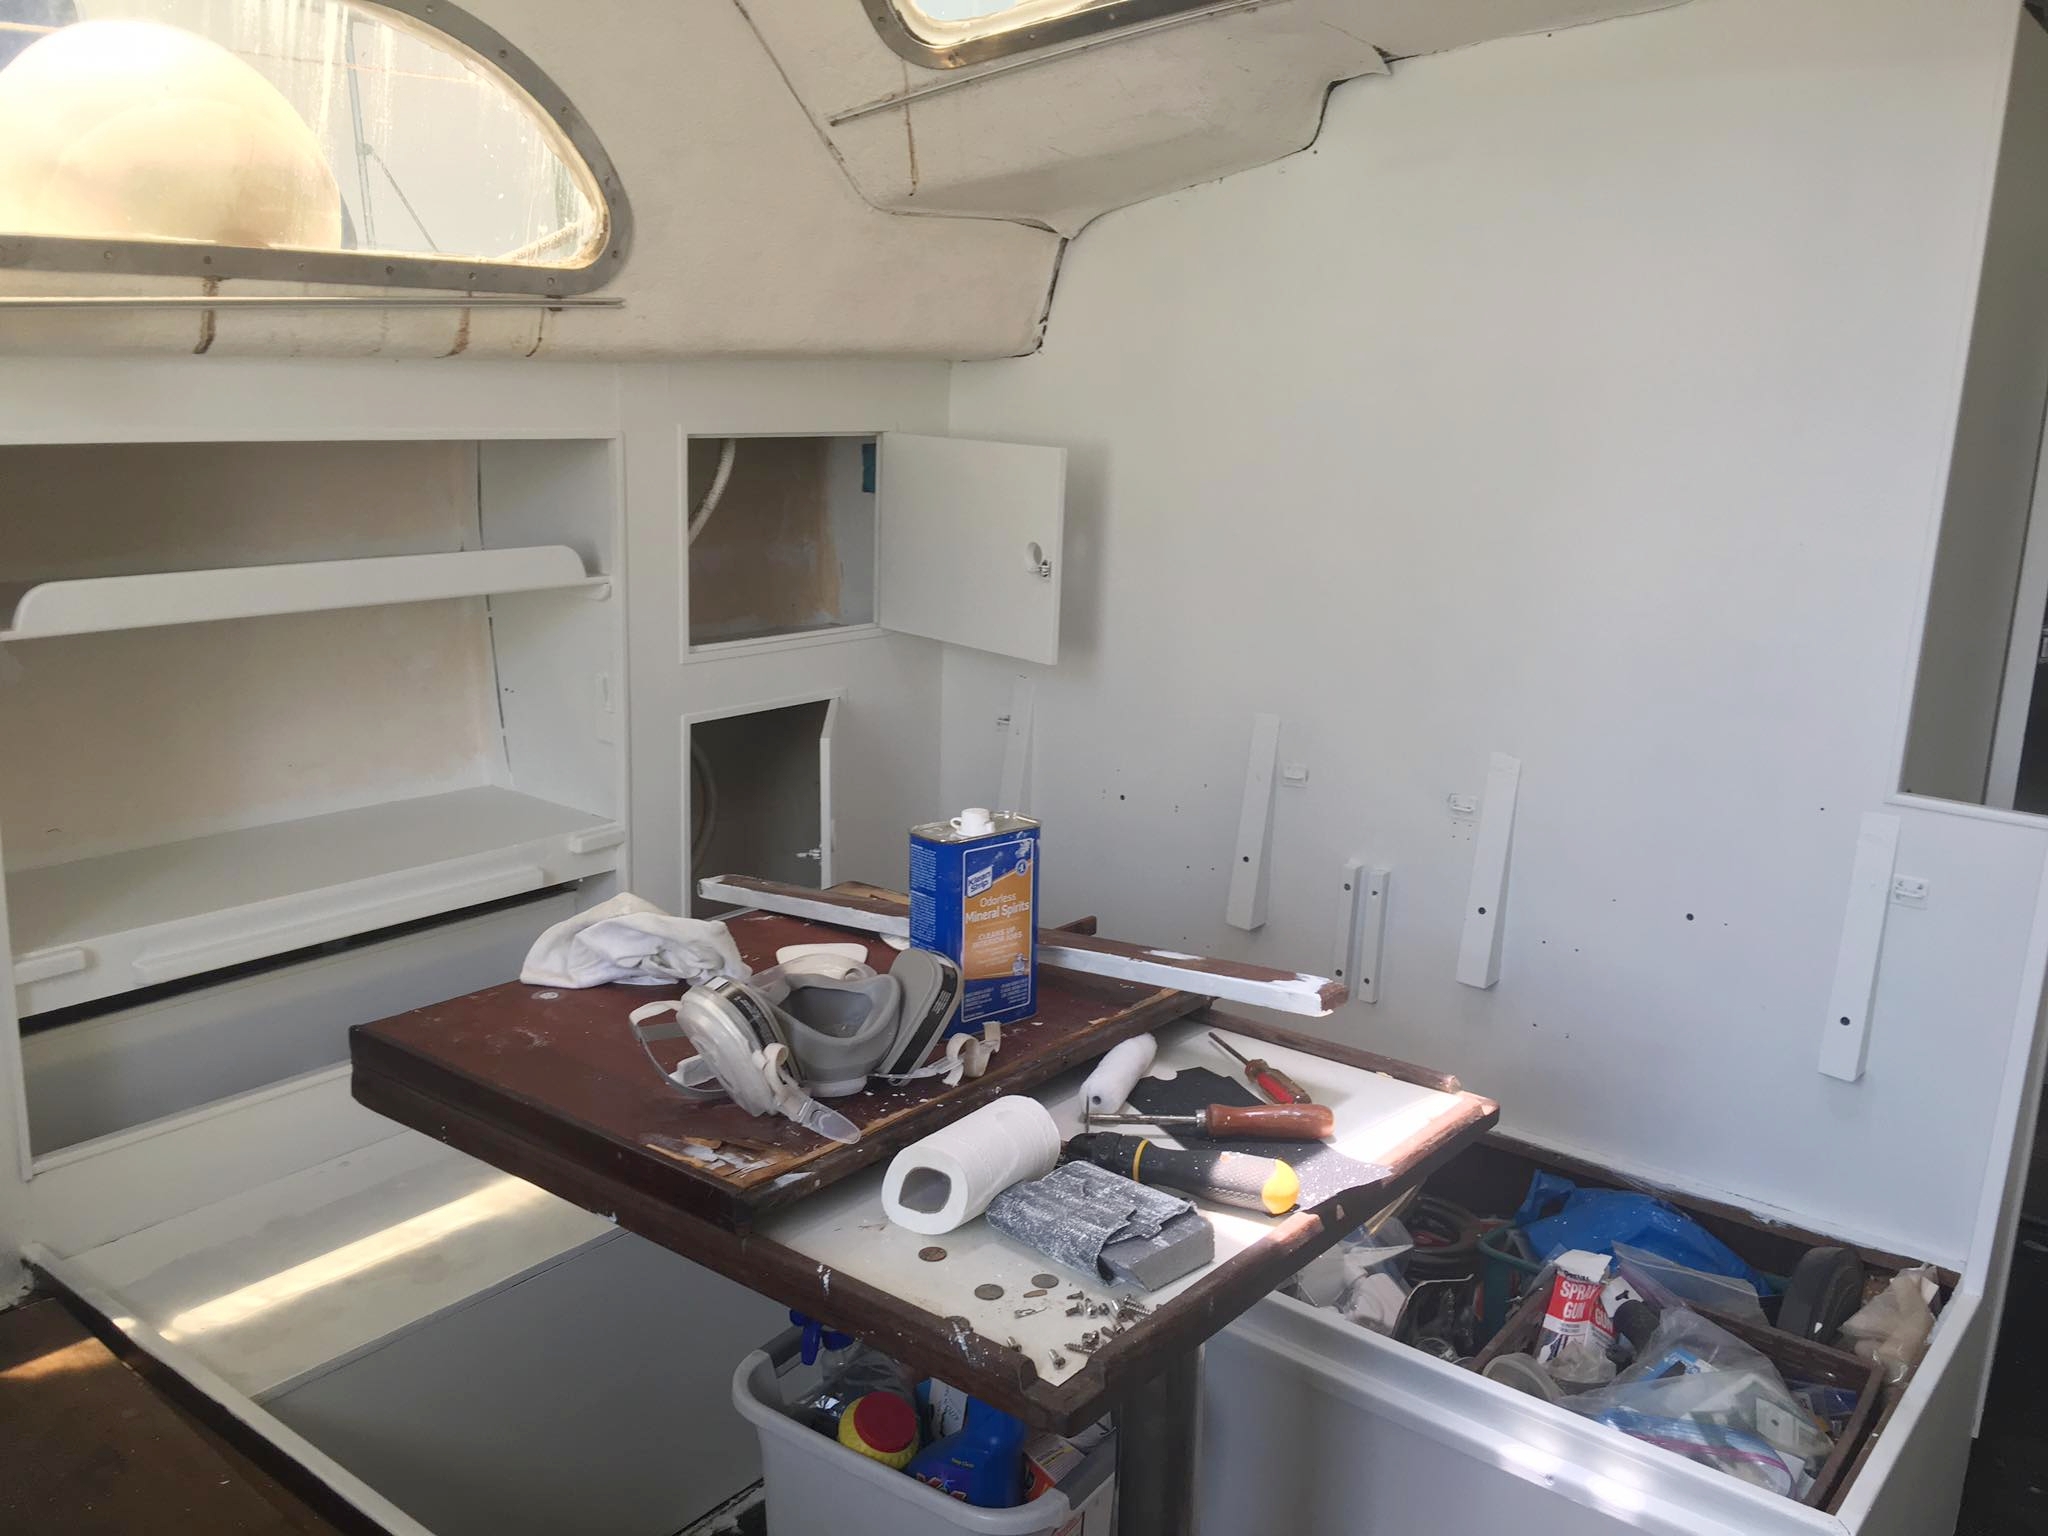 Refitting Our Sailboat Interior From An Antique Sailboat To